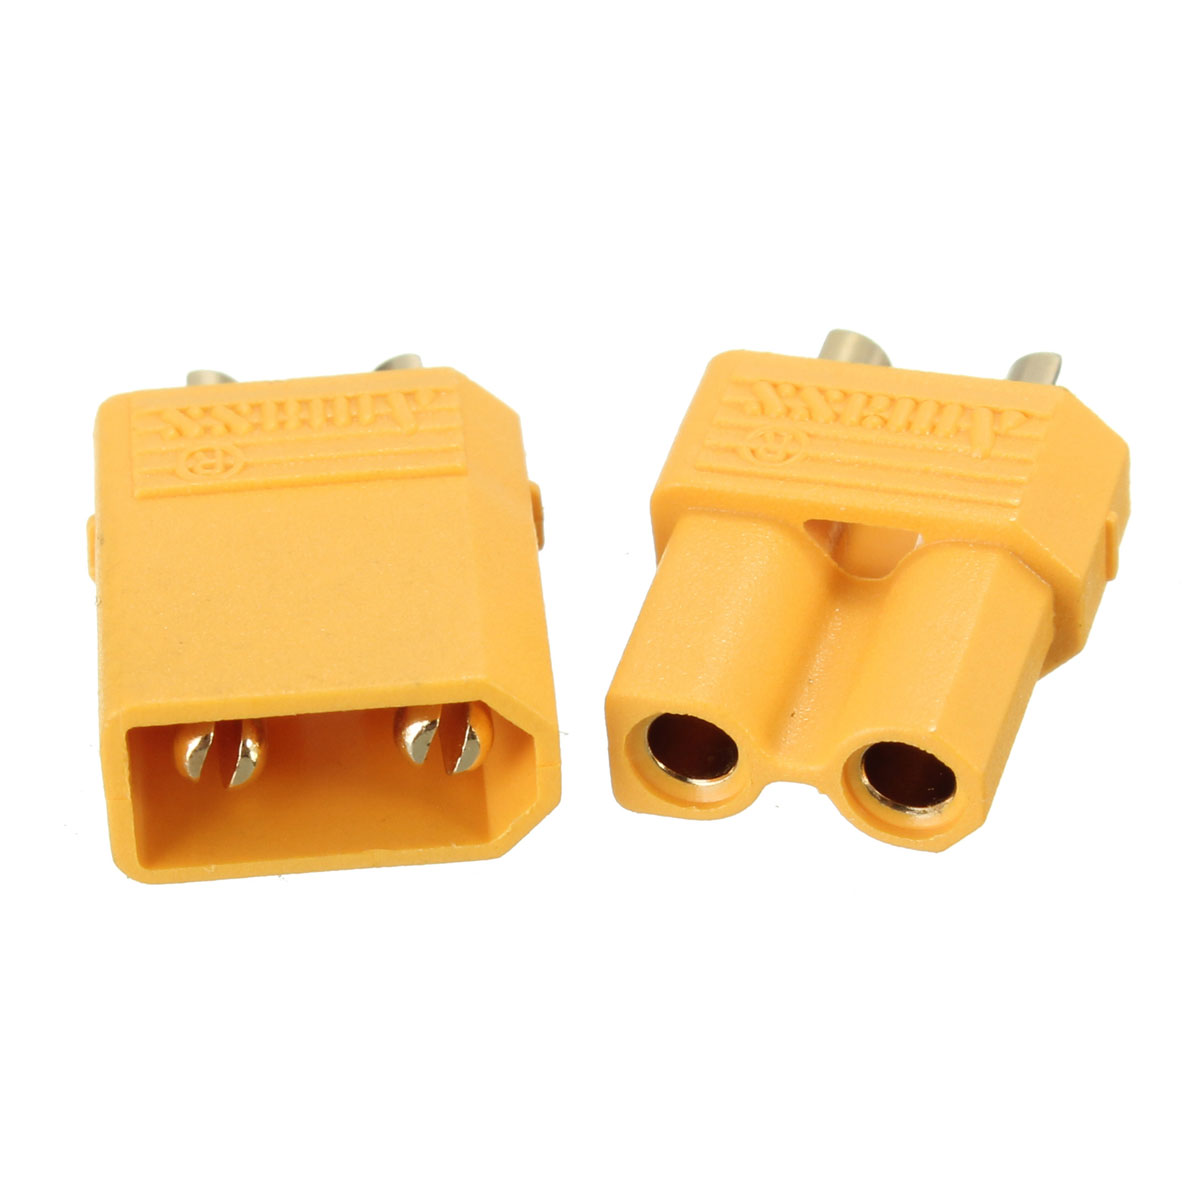 10-Pairs-XT30-2mm-Golden-Male-Female-Plug-Interface-Connector-1414120